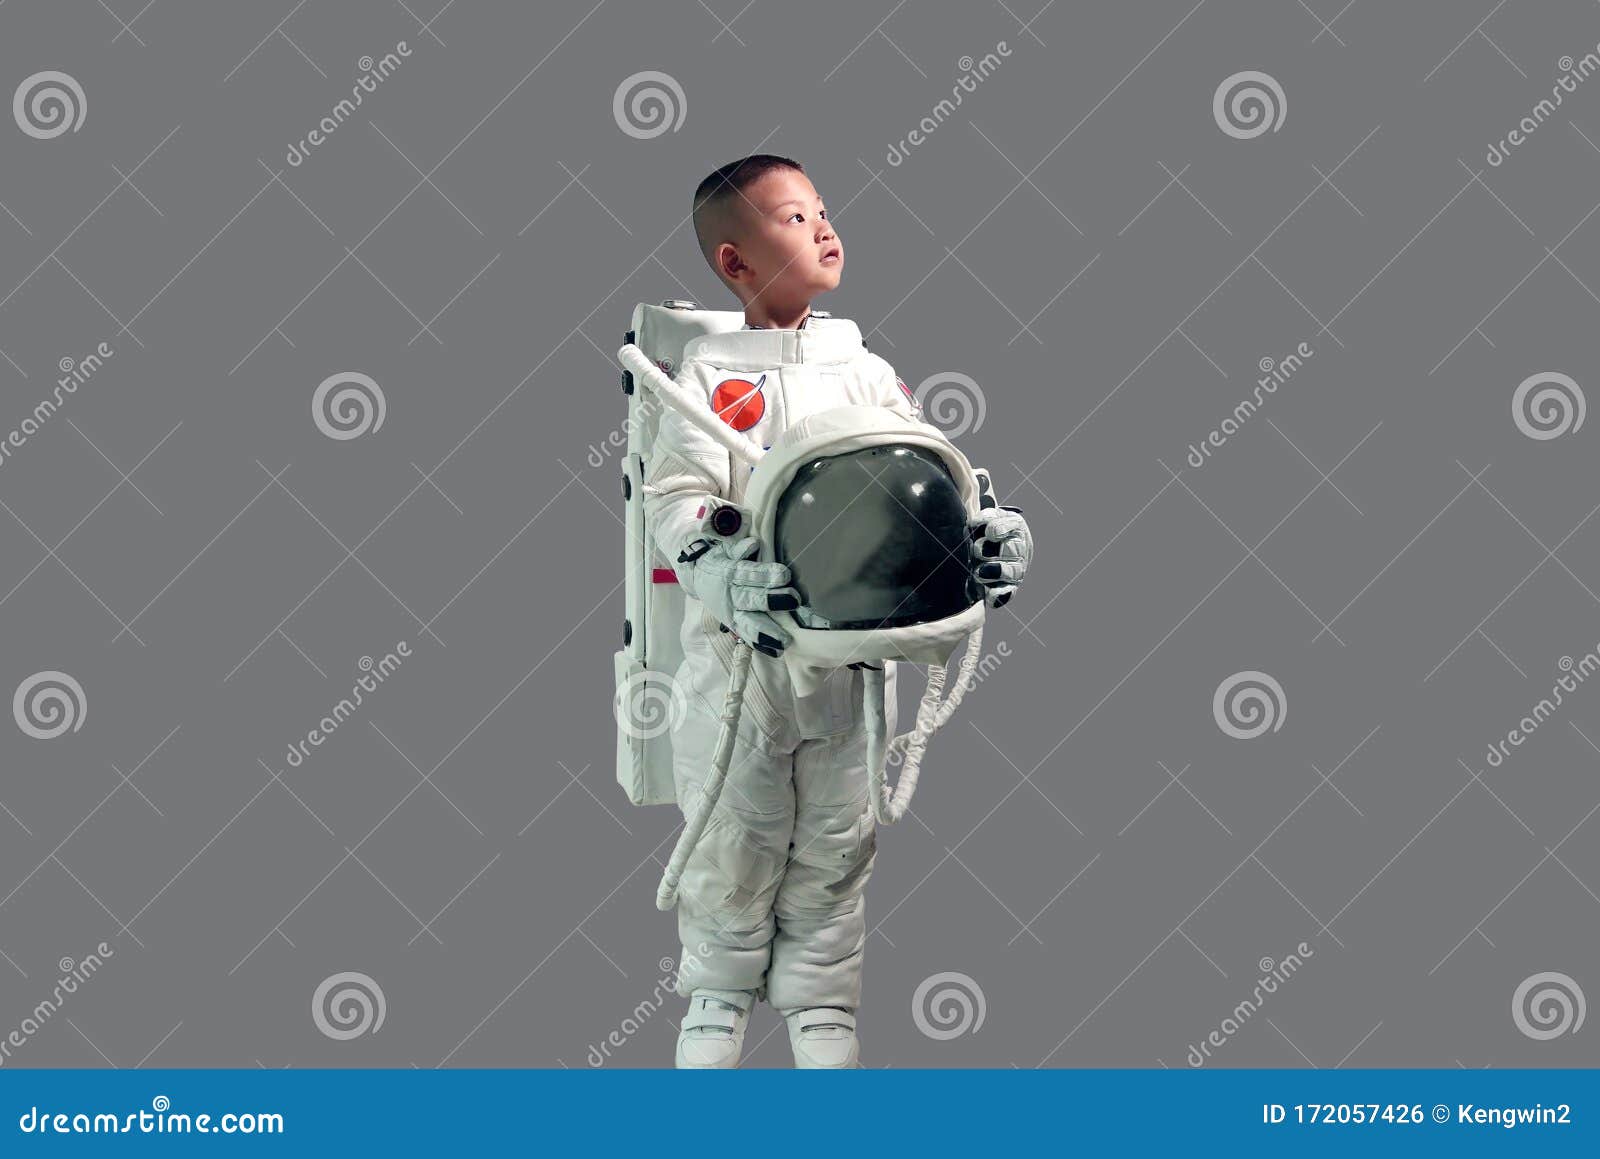 cute little boy in space suit holding helmet and standing looking up at the sky.